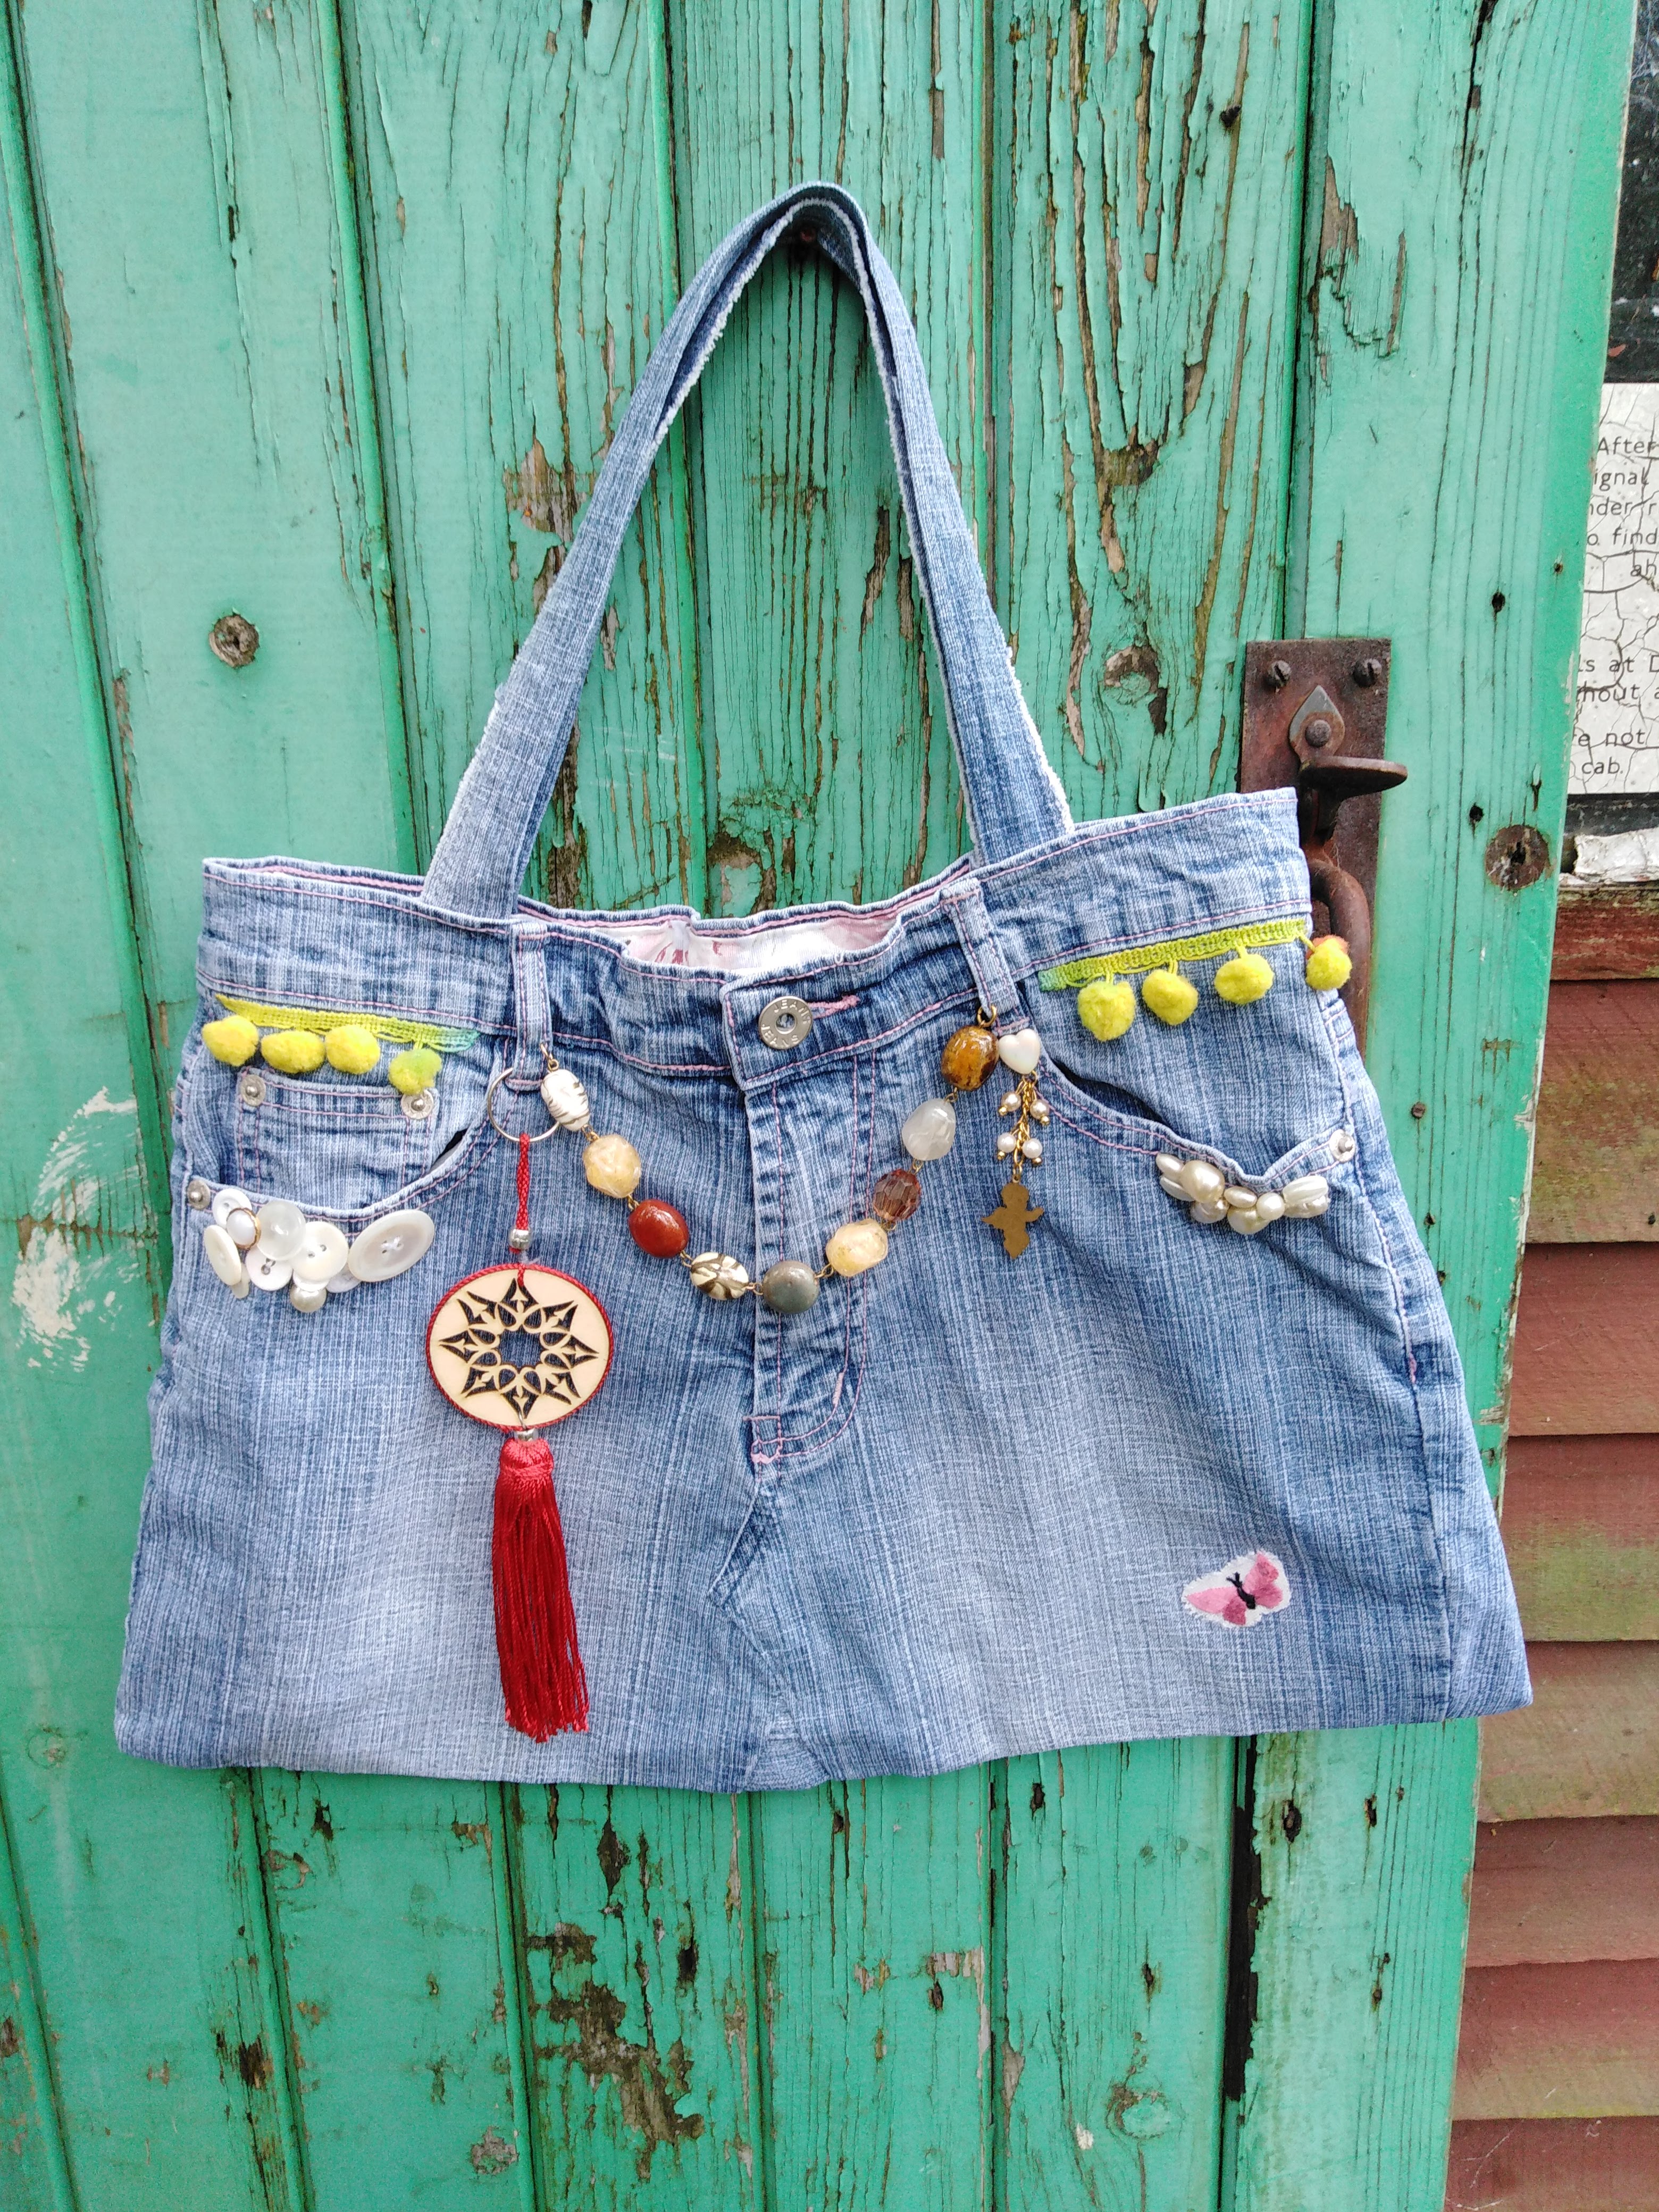 Buy Upcycled Hand Made Bag Recycled Materials Textil Jean Denim Corduroy,  Bolso Hecho a Mano Con Materia Reciclada Vaqueros Pana unique Maxibag  Online in India - Etsy